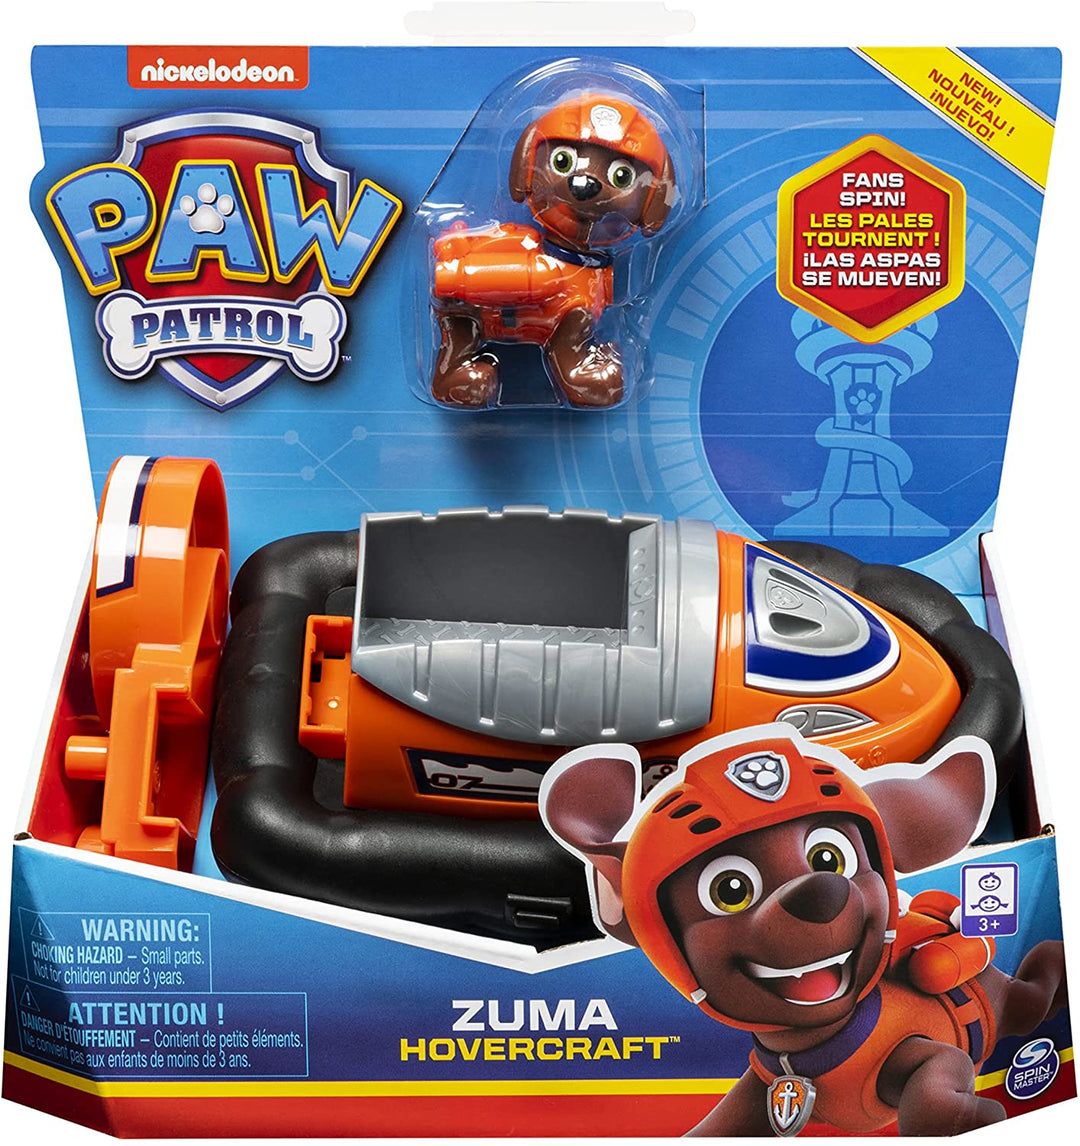 PAW Patrol, Zuma’s Hovercraft Vehicle with Collectible Figure, for Kids Aged 3 Years and Over